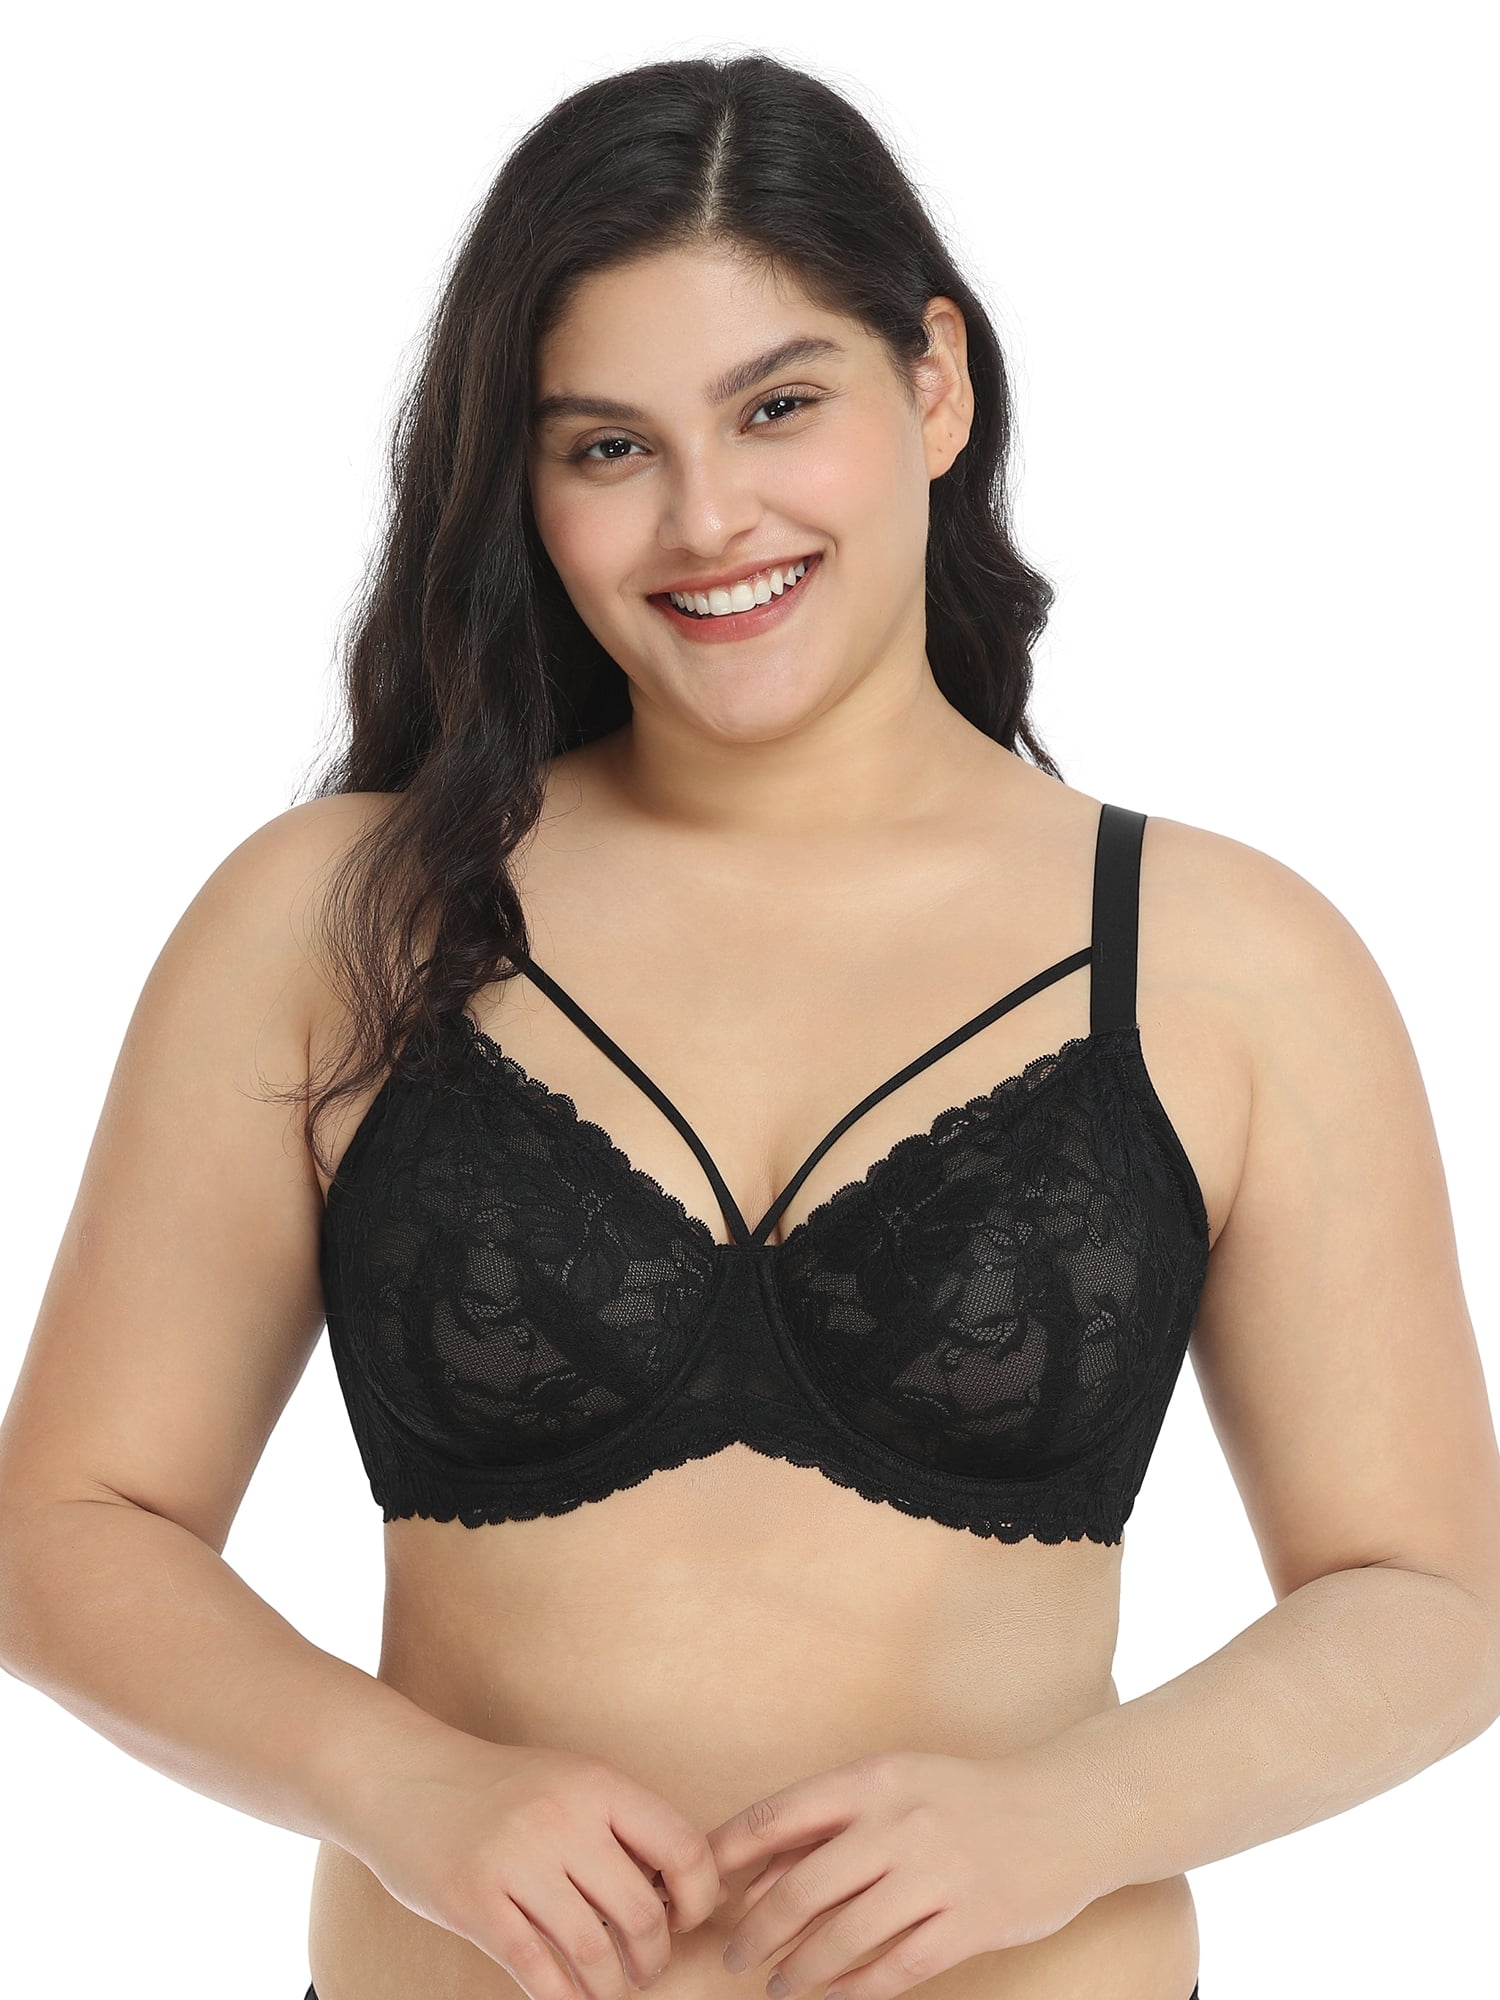 Paramour by Felina | Amaranth Cushioned Comfort Unlined Minimizer Bra  (French Navy, 42G)